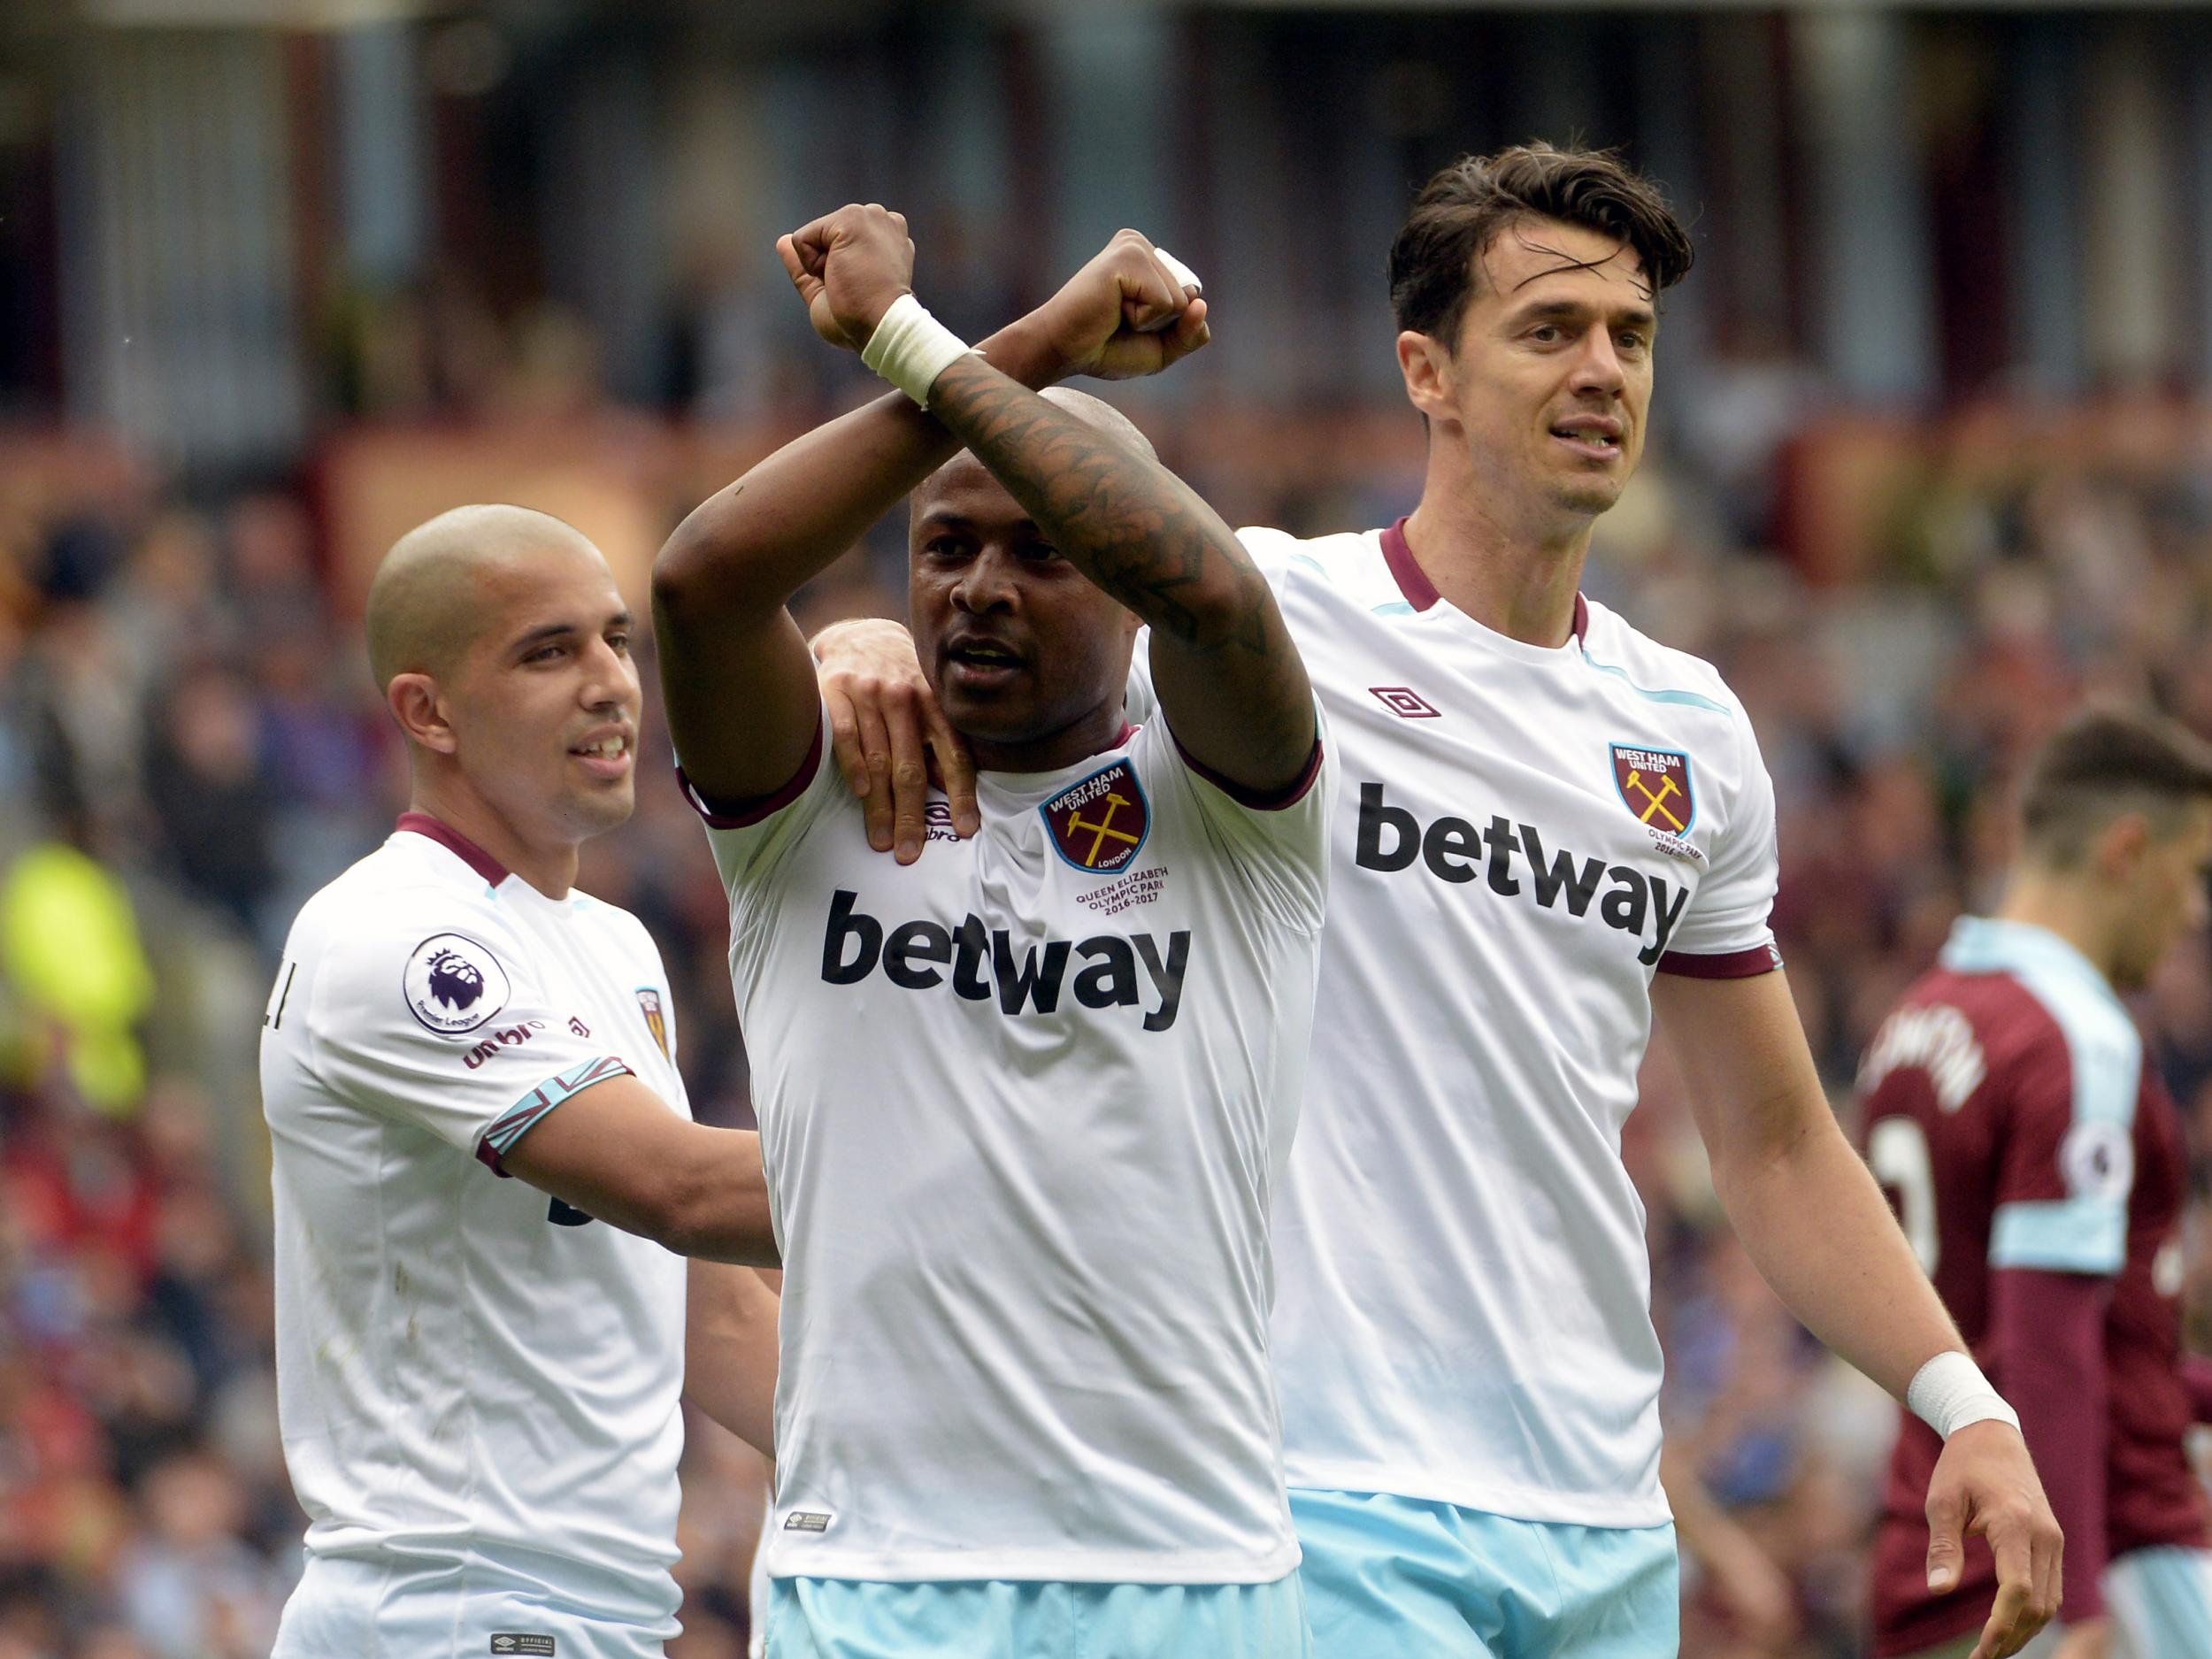 Ayew's goal ensured West Ham finished 11th in the table, ahead of Burnley